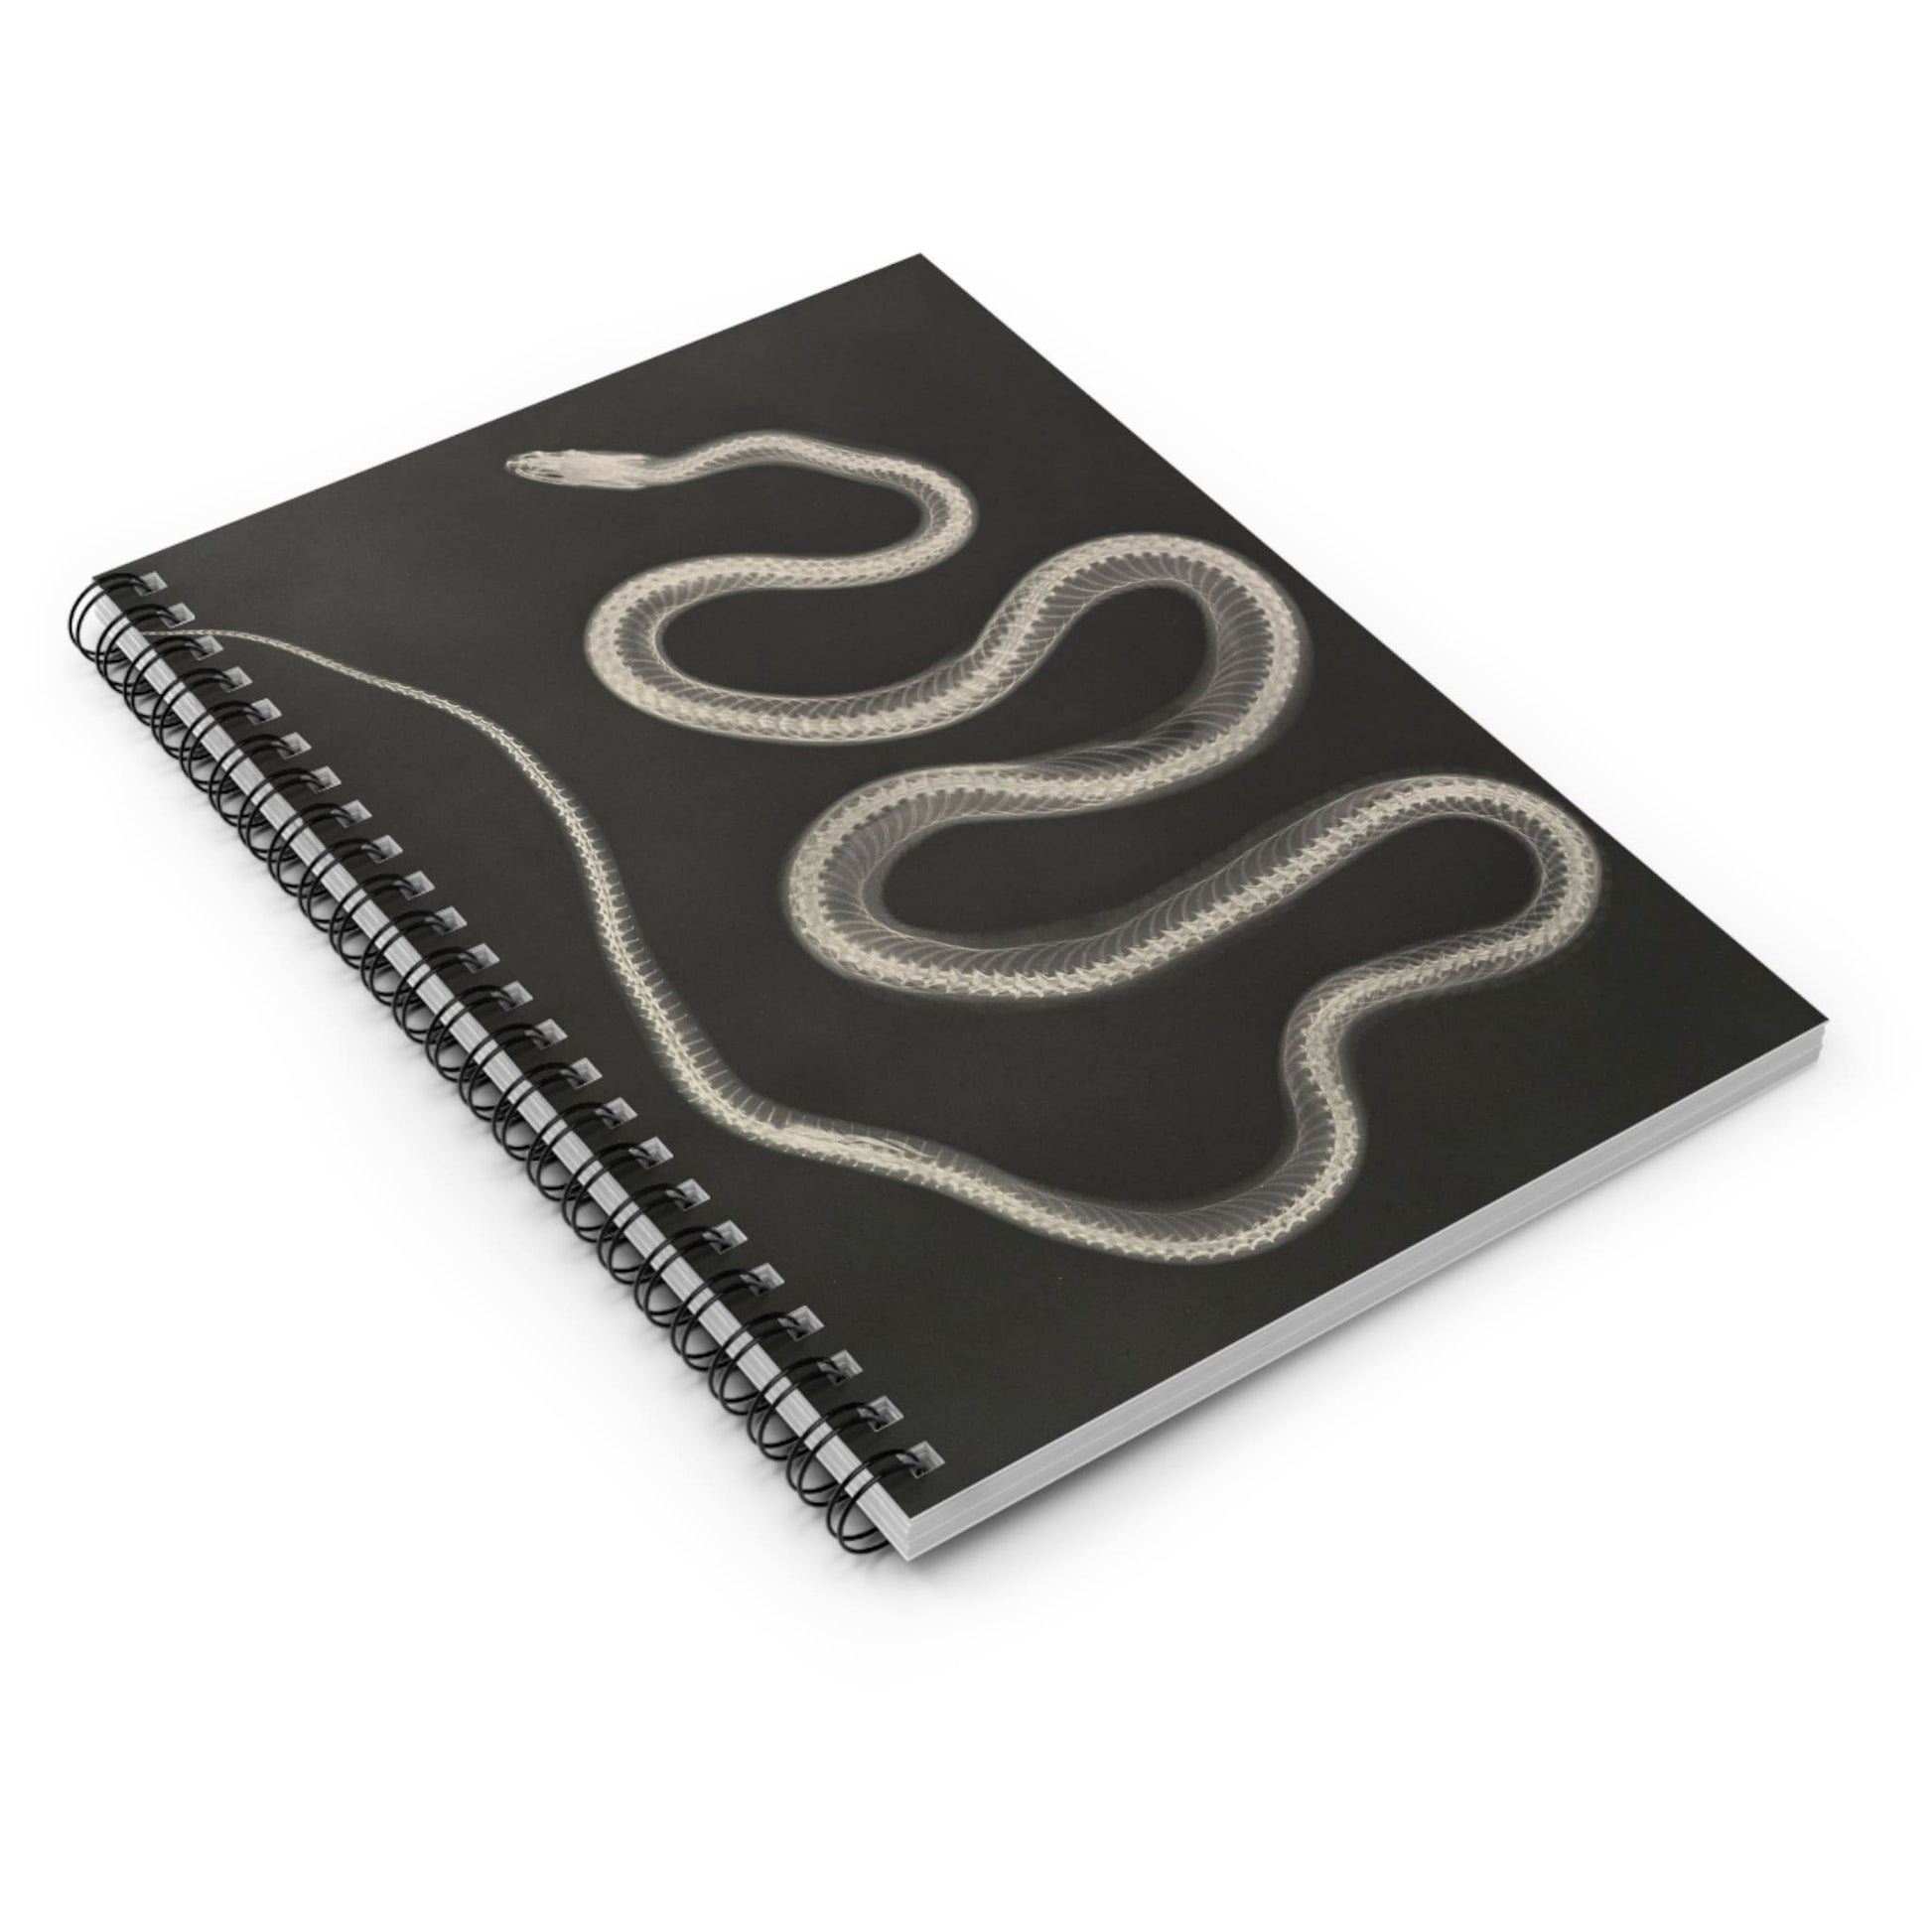 Black and White Snake Spiral Notebook Laying Flat on White Surface